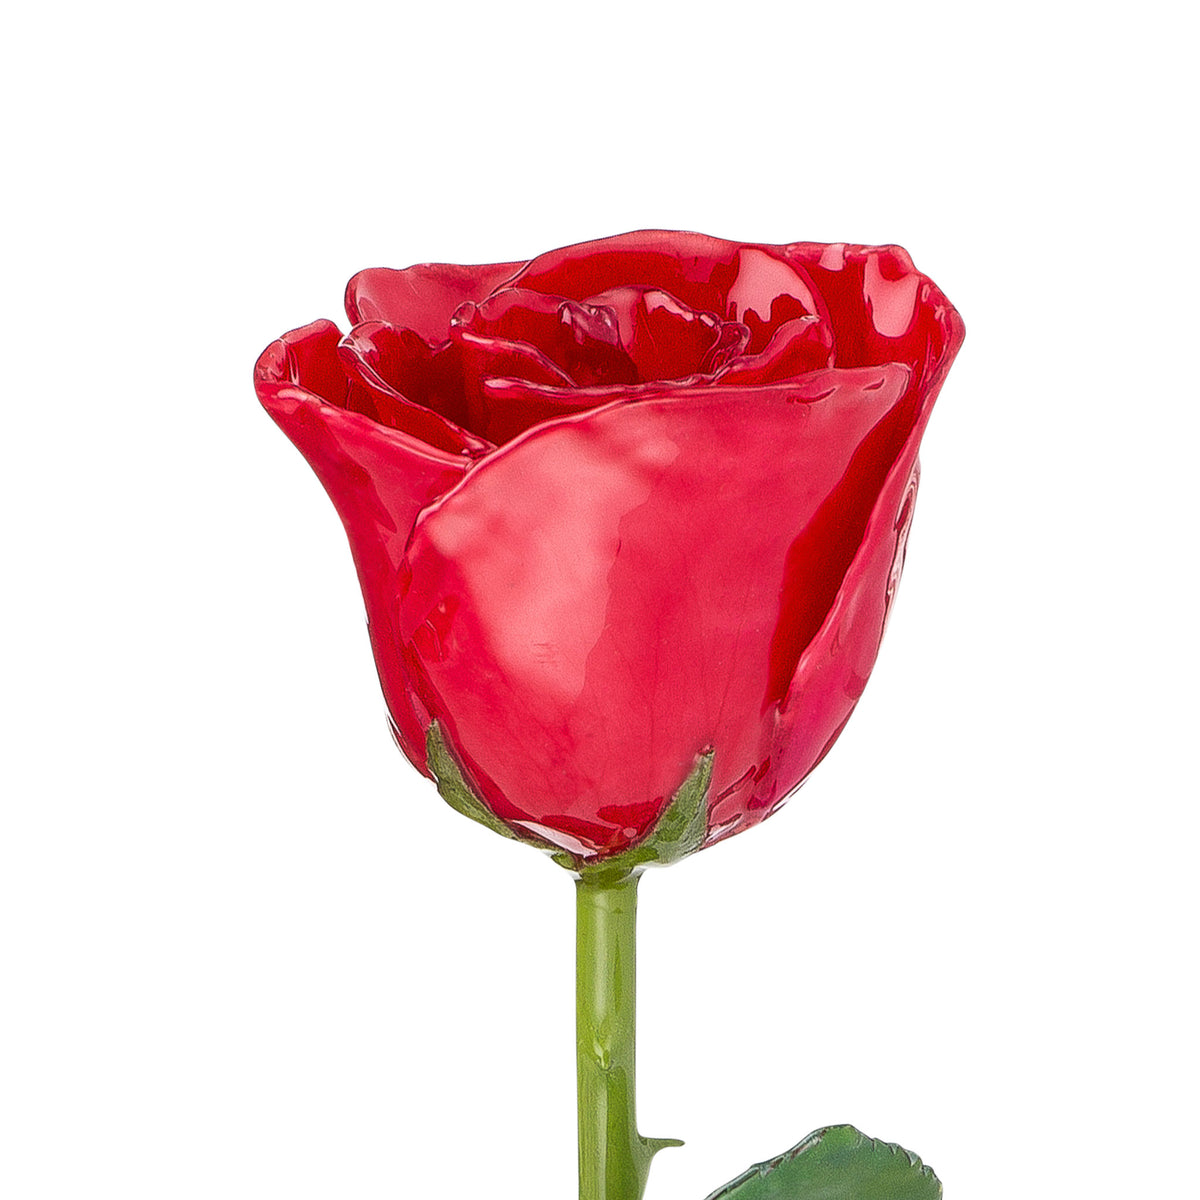 Natural (Green Stem) Forever Rose with Red Colored Petals. View of Stem, Leaves, and Rose Petals. This a Forever Rose without any gold or other precious metals on it.